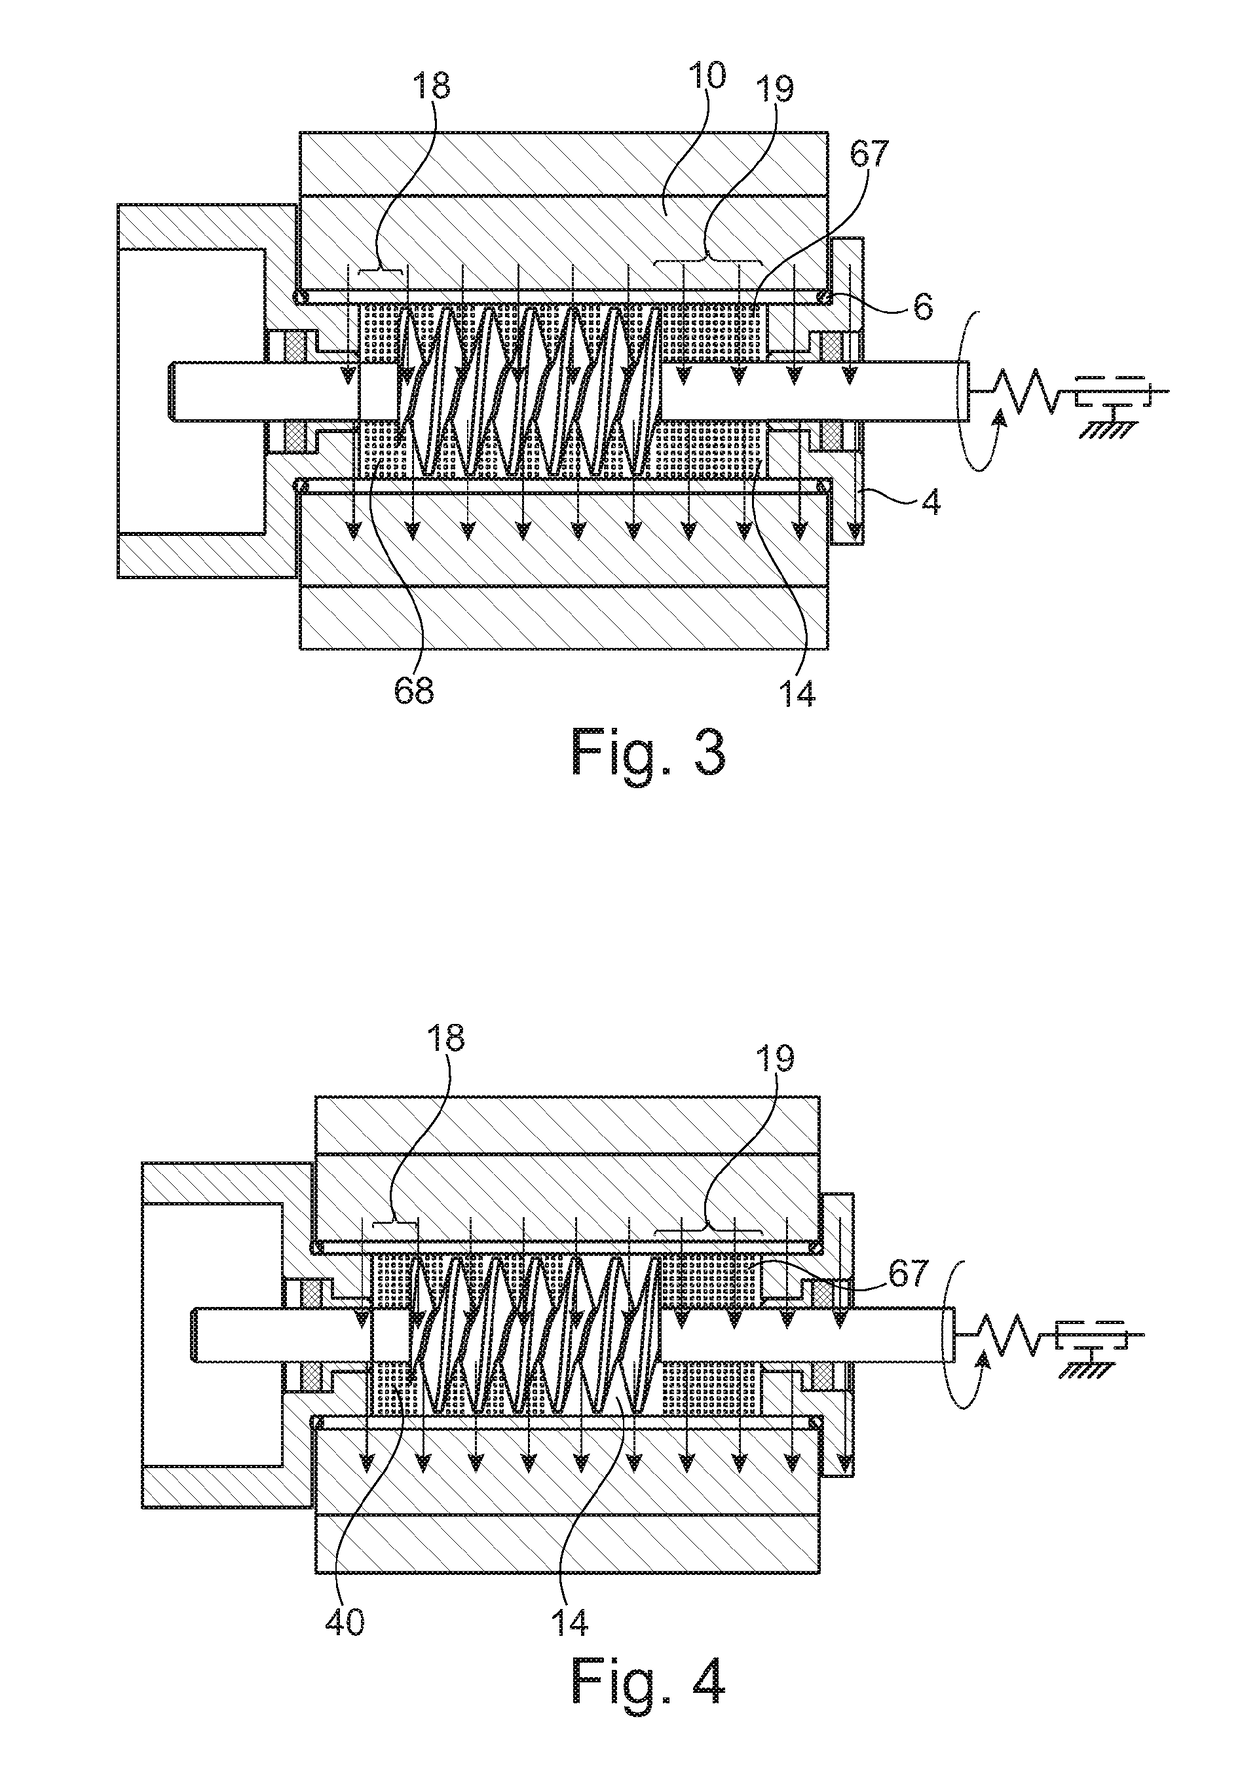 Magnetorheological actuator having a rotationally driven threaded spindle and clutch having an actuator